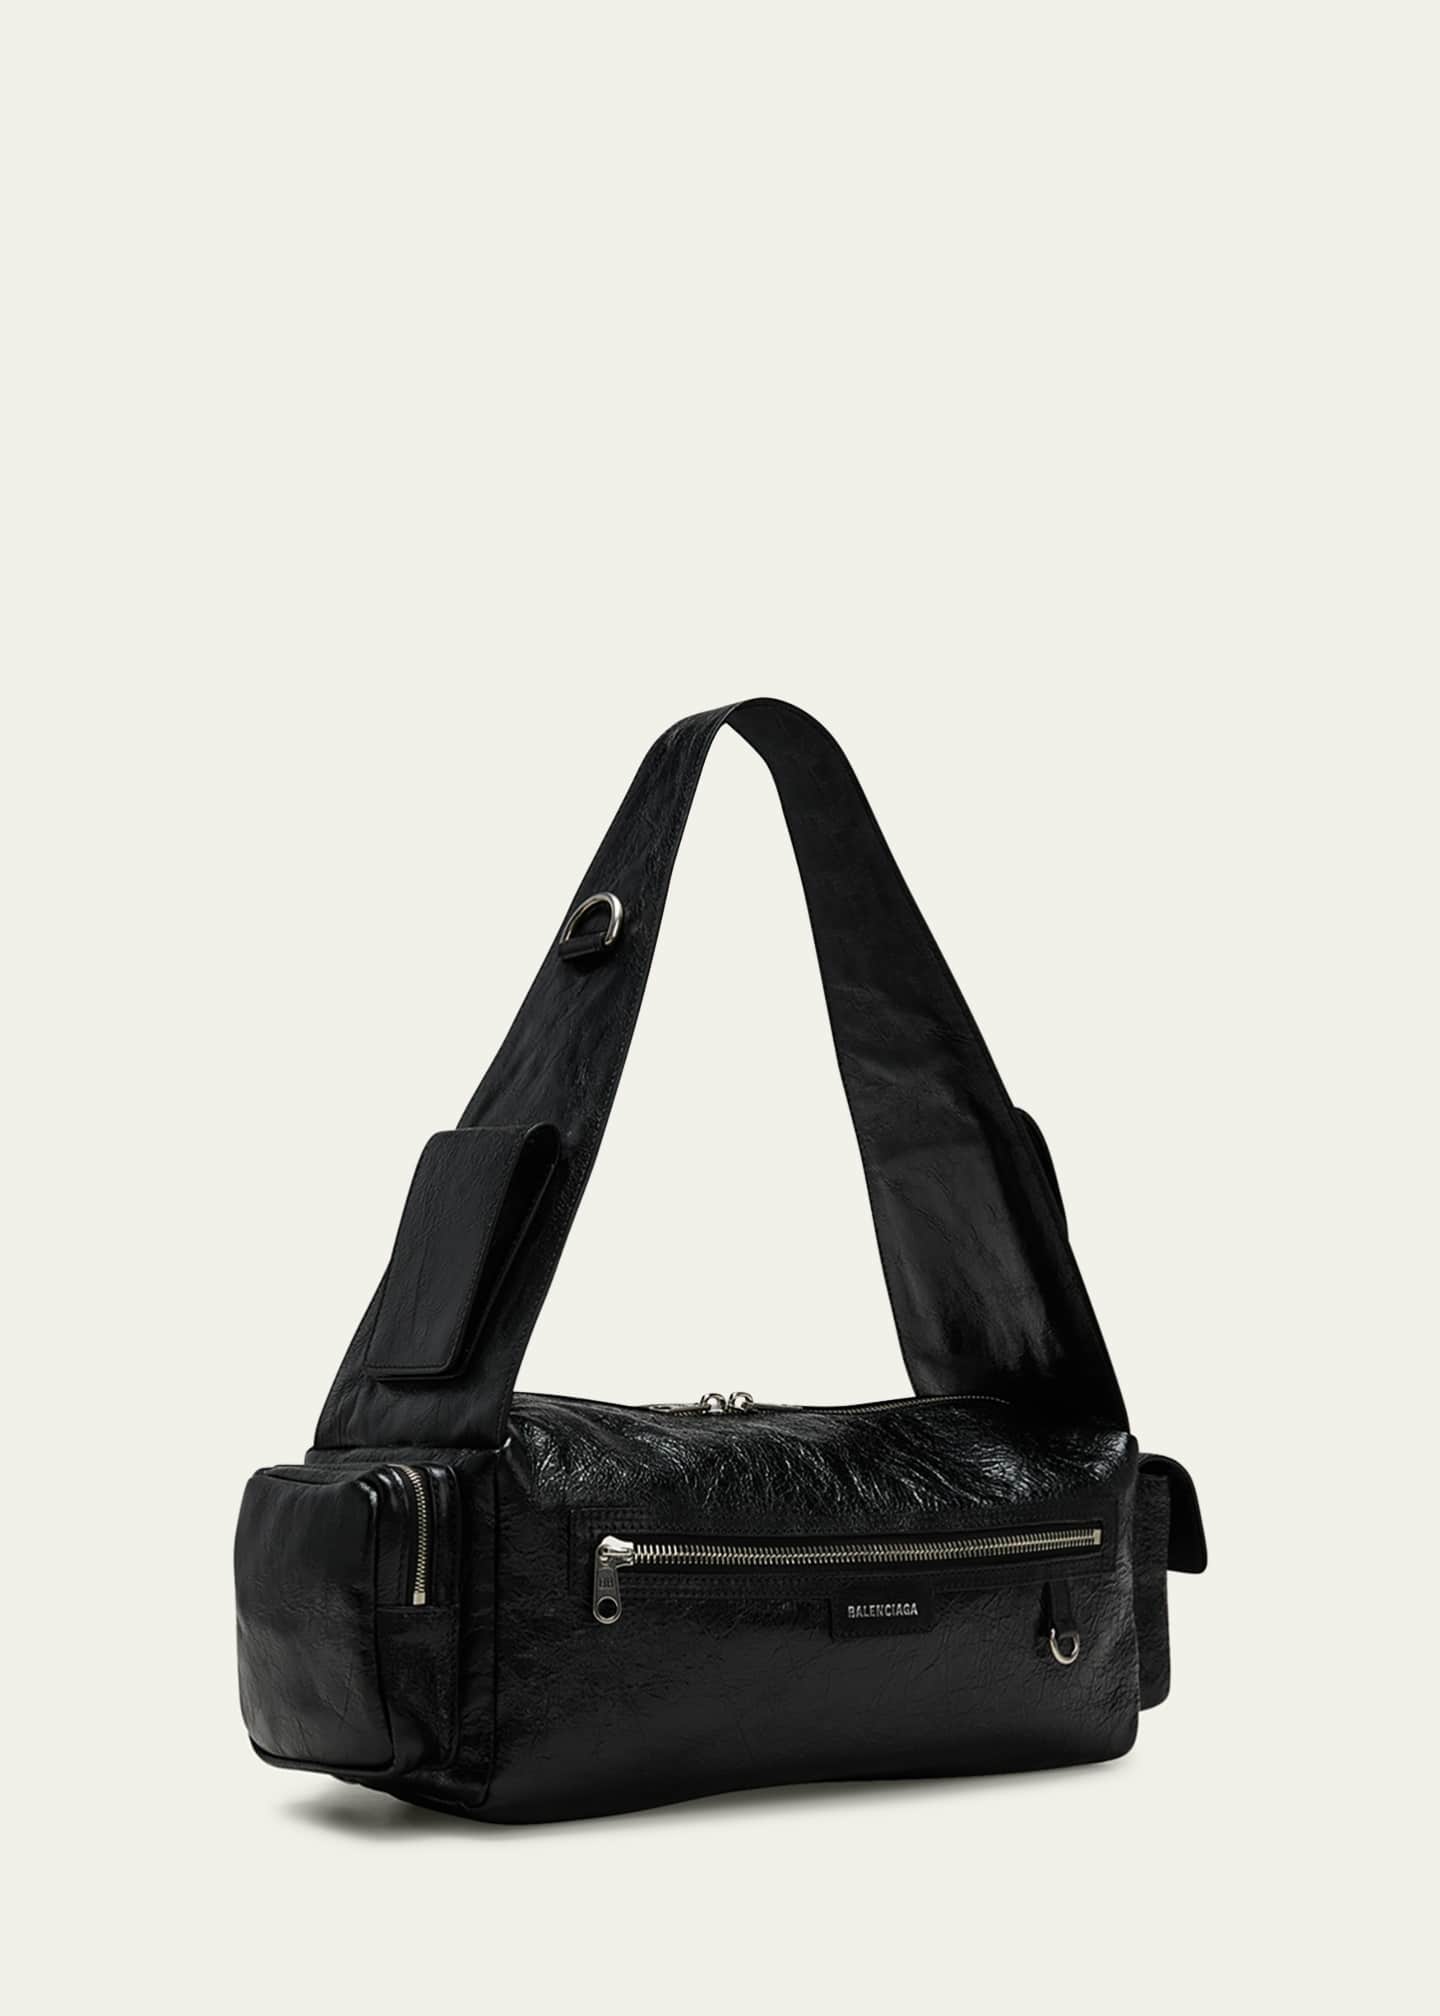 Men's Small Leather Sling Bag